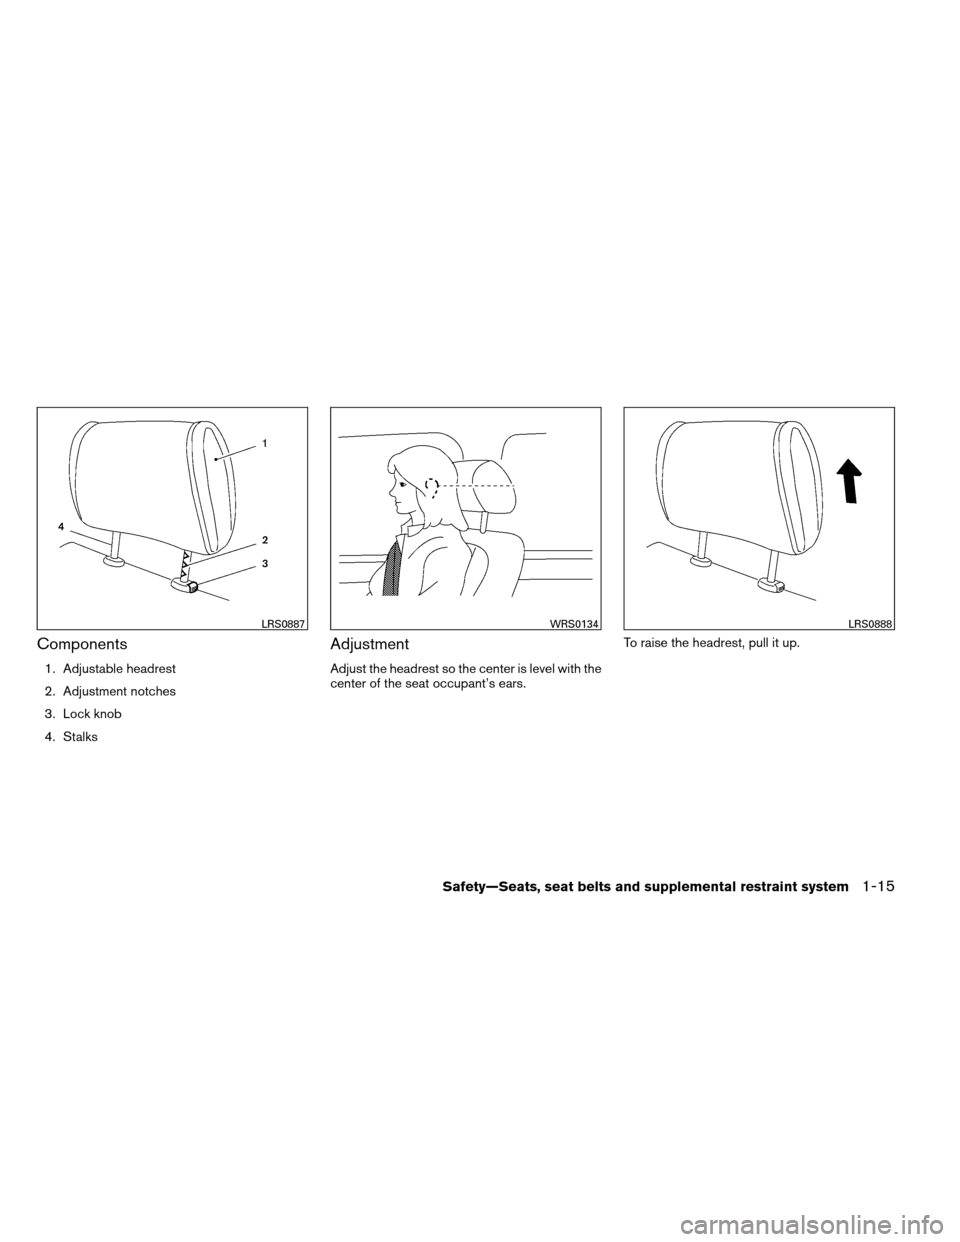 NISSAN ARMADA 2012 1.G Owners Guide Components
1. Adjustable headrest
2. Adjustment notches
3. Lock knob
4. Stalks
Adjustment
Adjust the headrest so the center is level with the
center of the seat occupant’s ears.To raise the headrest